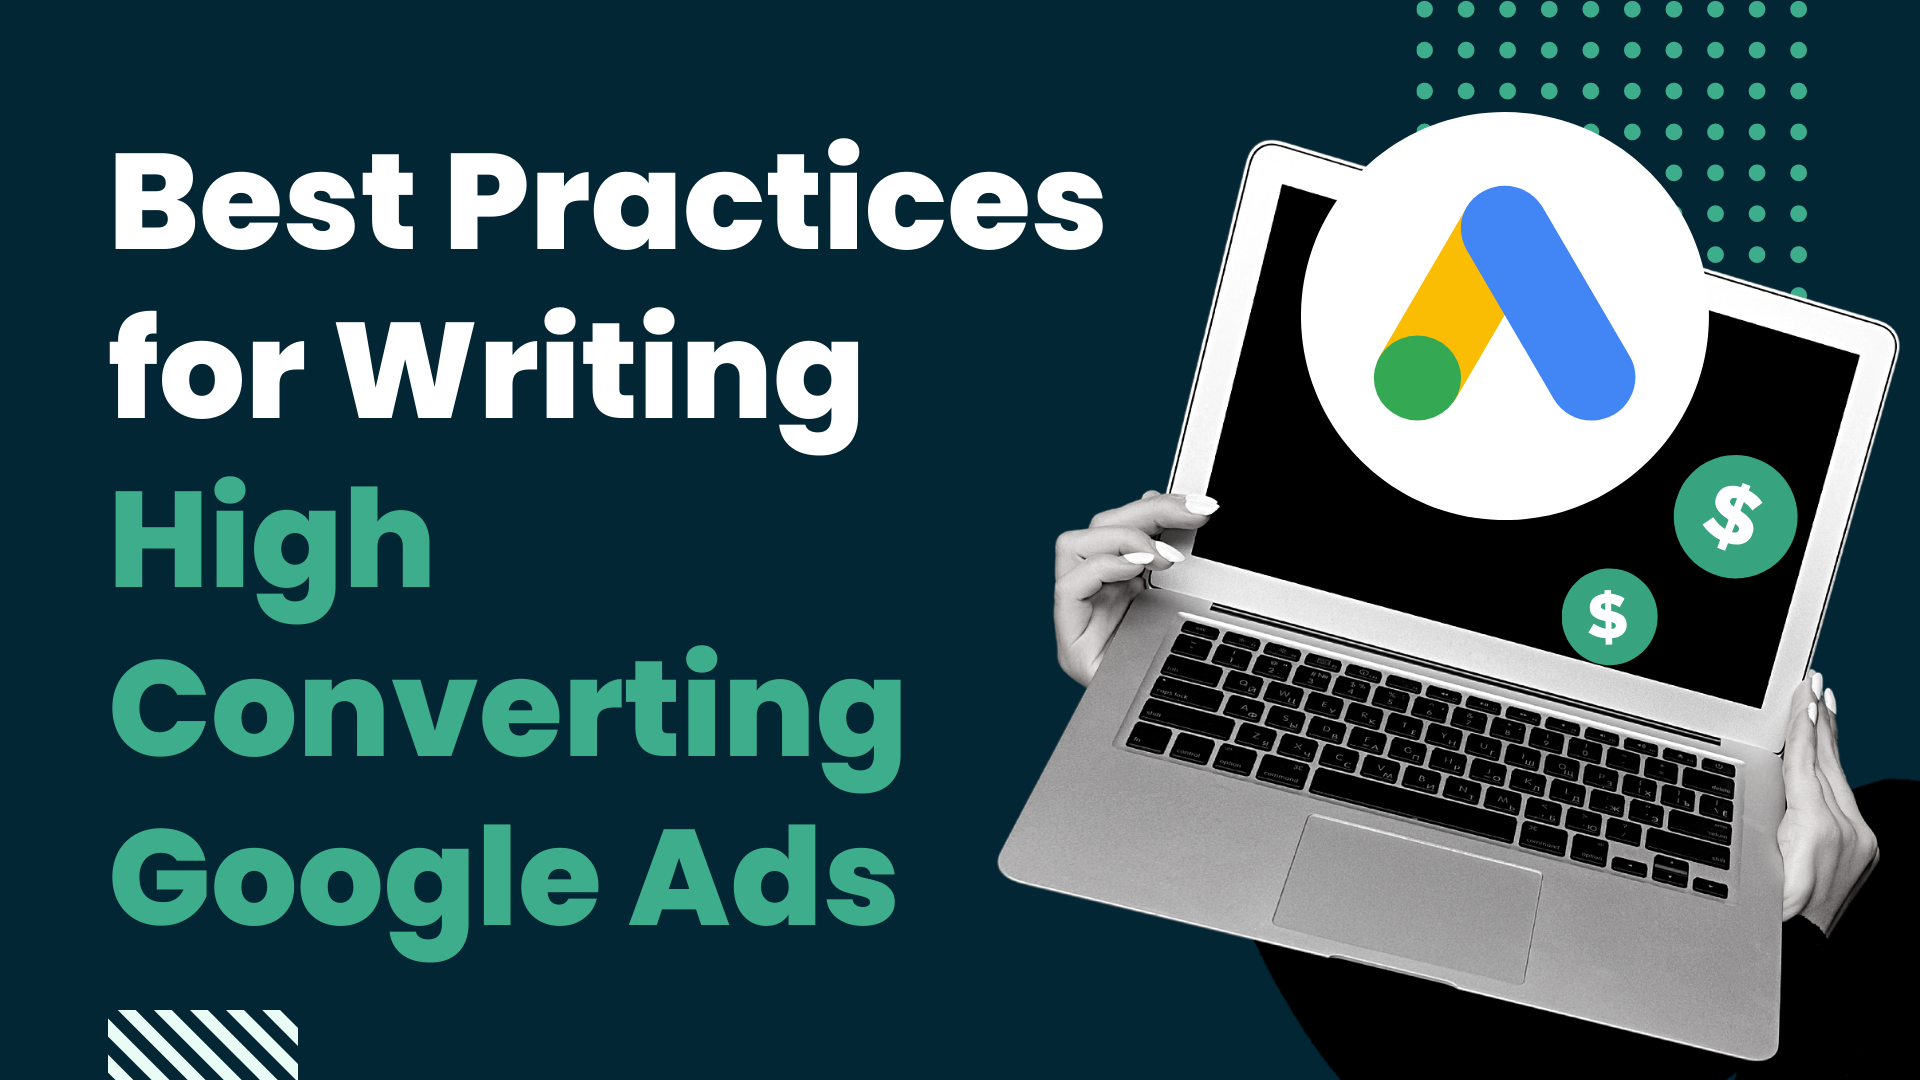 Best Practices for Writing High Converting Google Ads